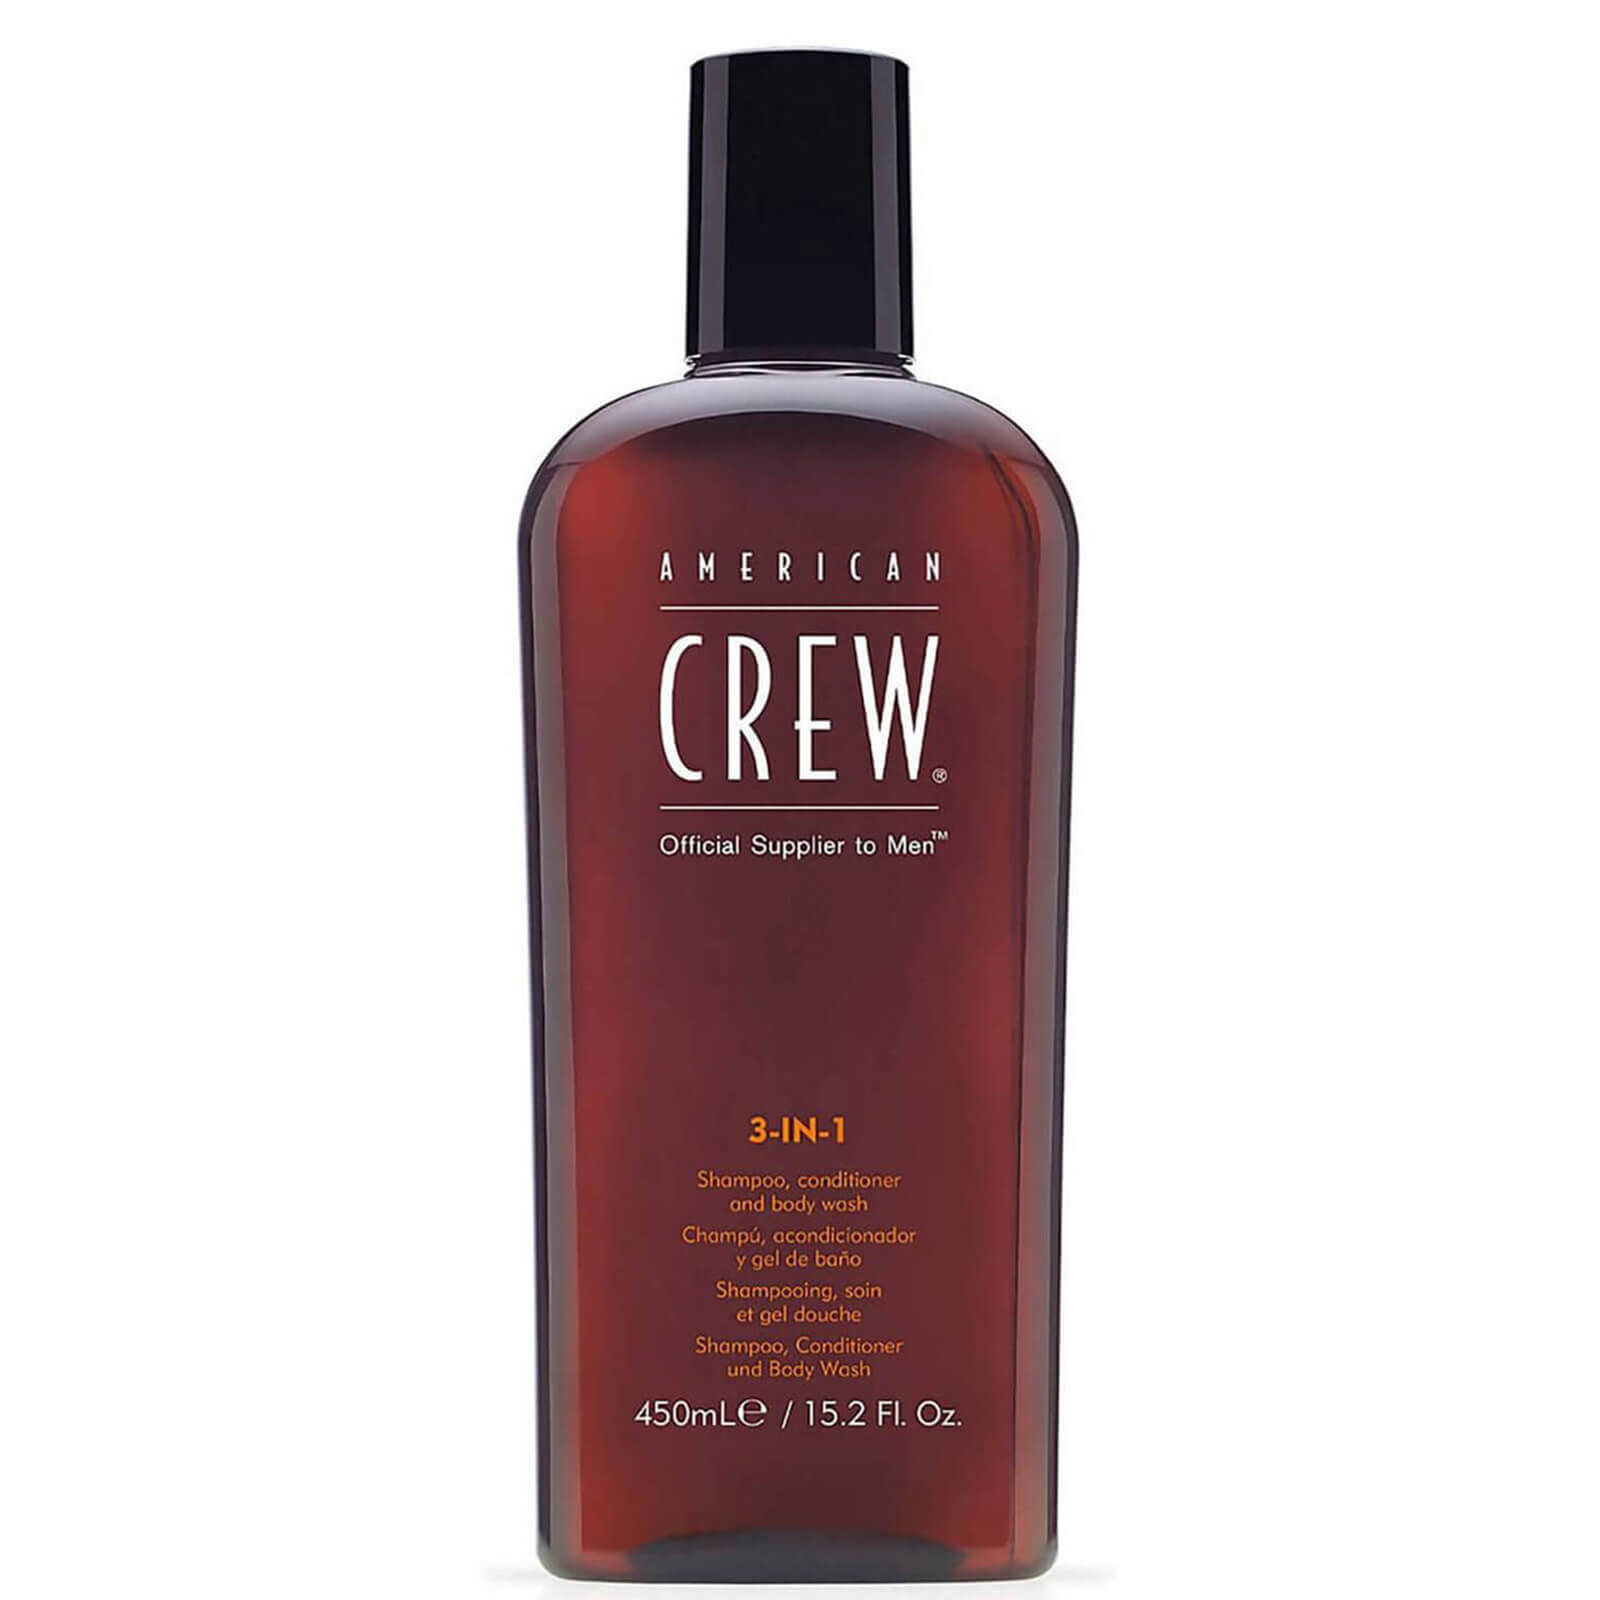 Photos - Hair Product American Crew 3-In-1  7204481000 (450ml)